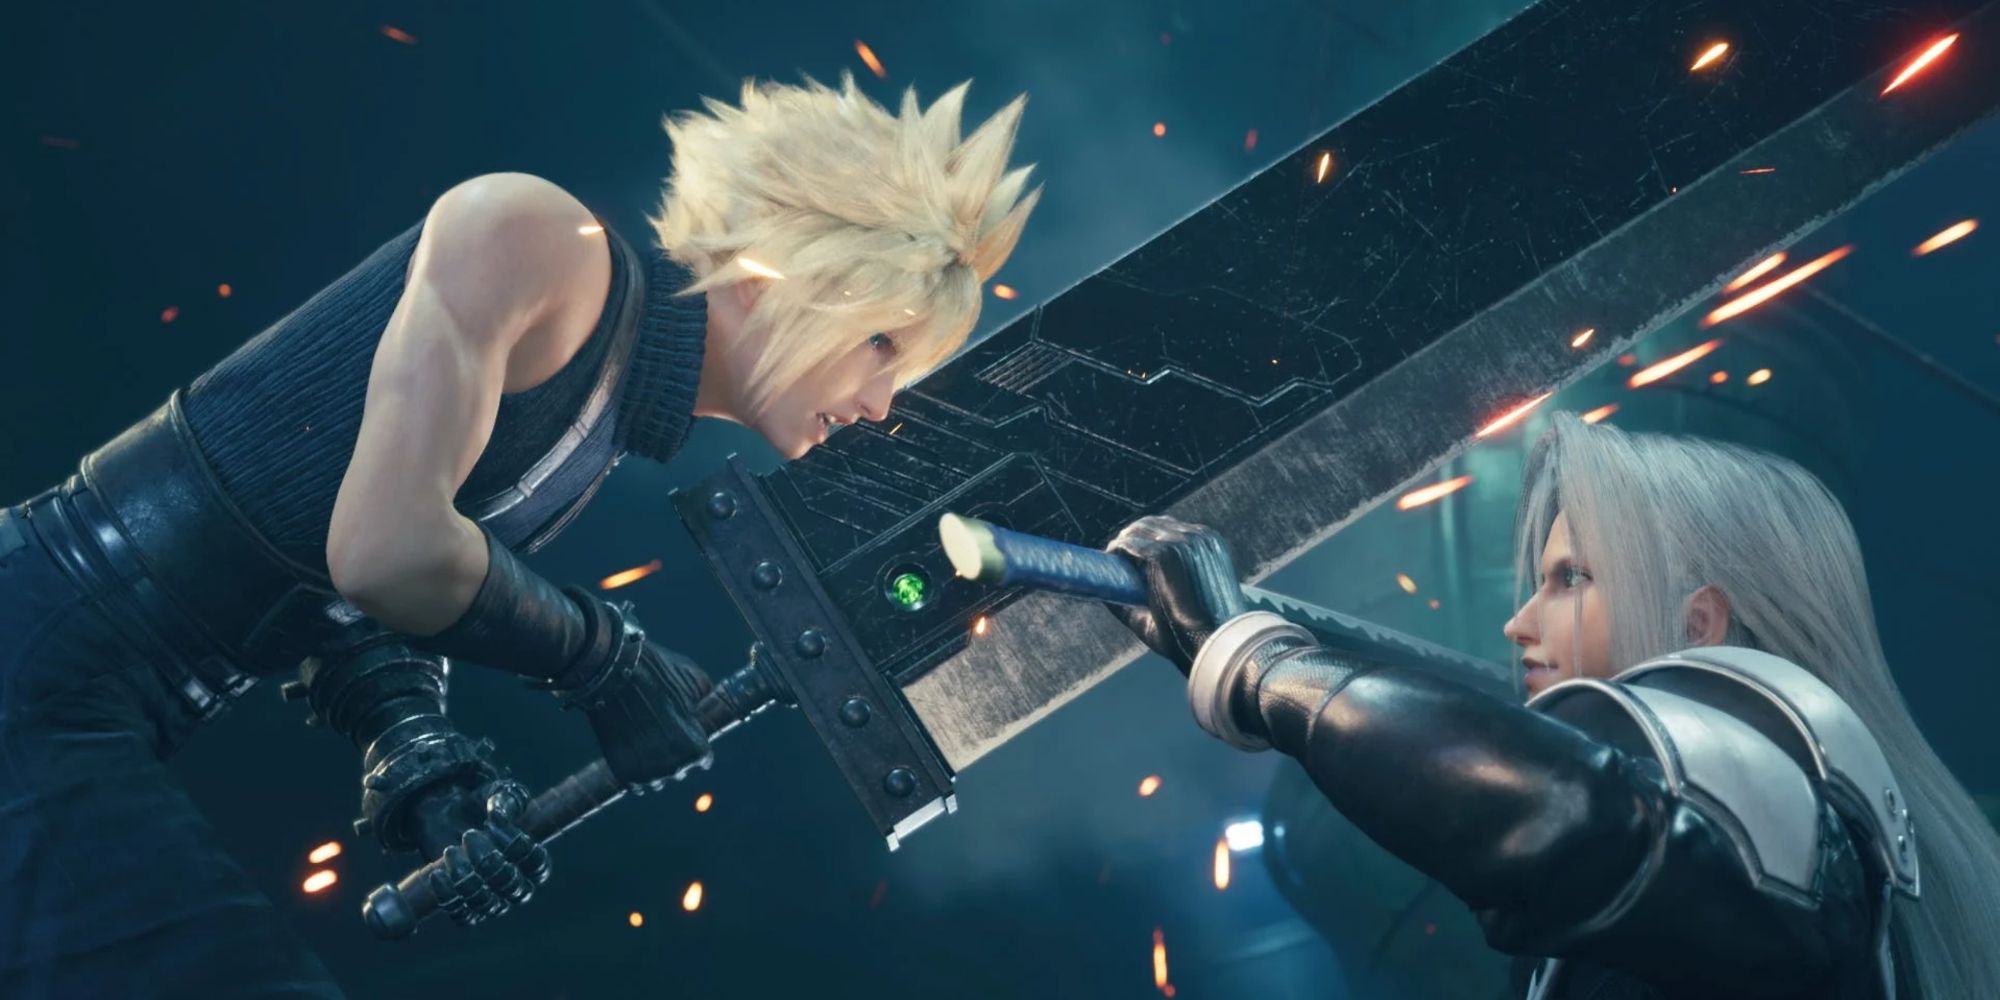 Cloud's Buster Sword clashing with Sephiroth's Masamune in Final Fantasy 7 Remake